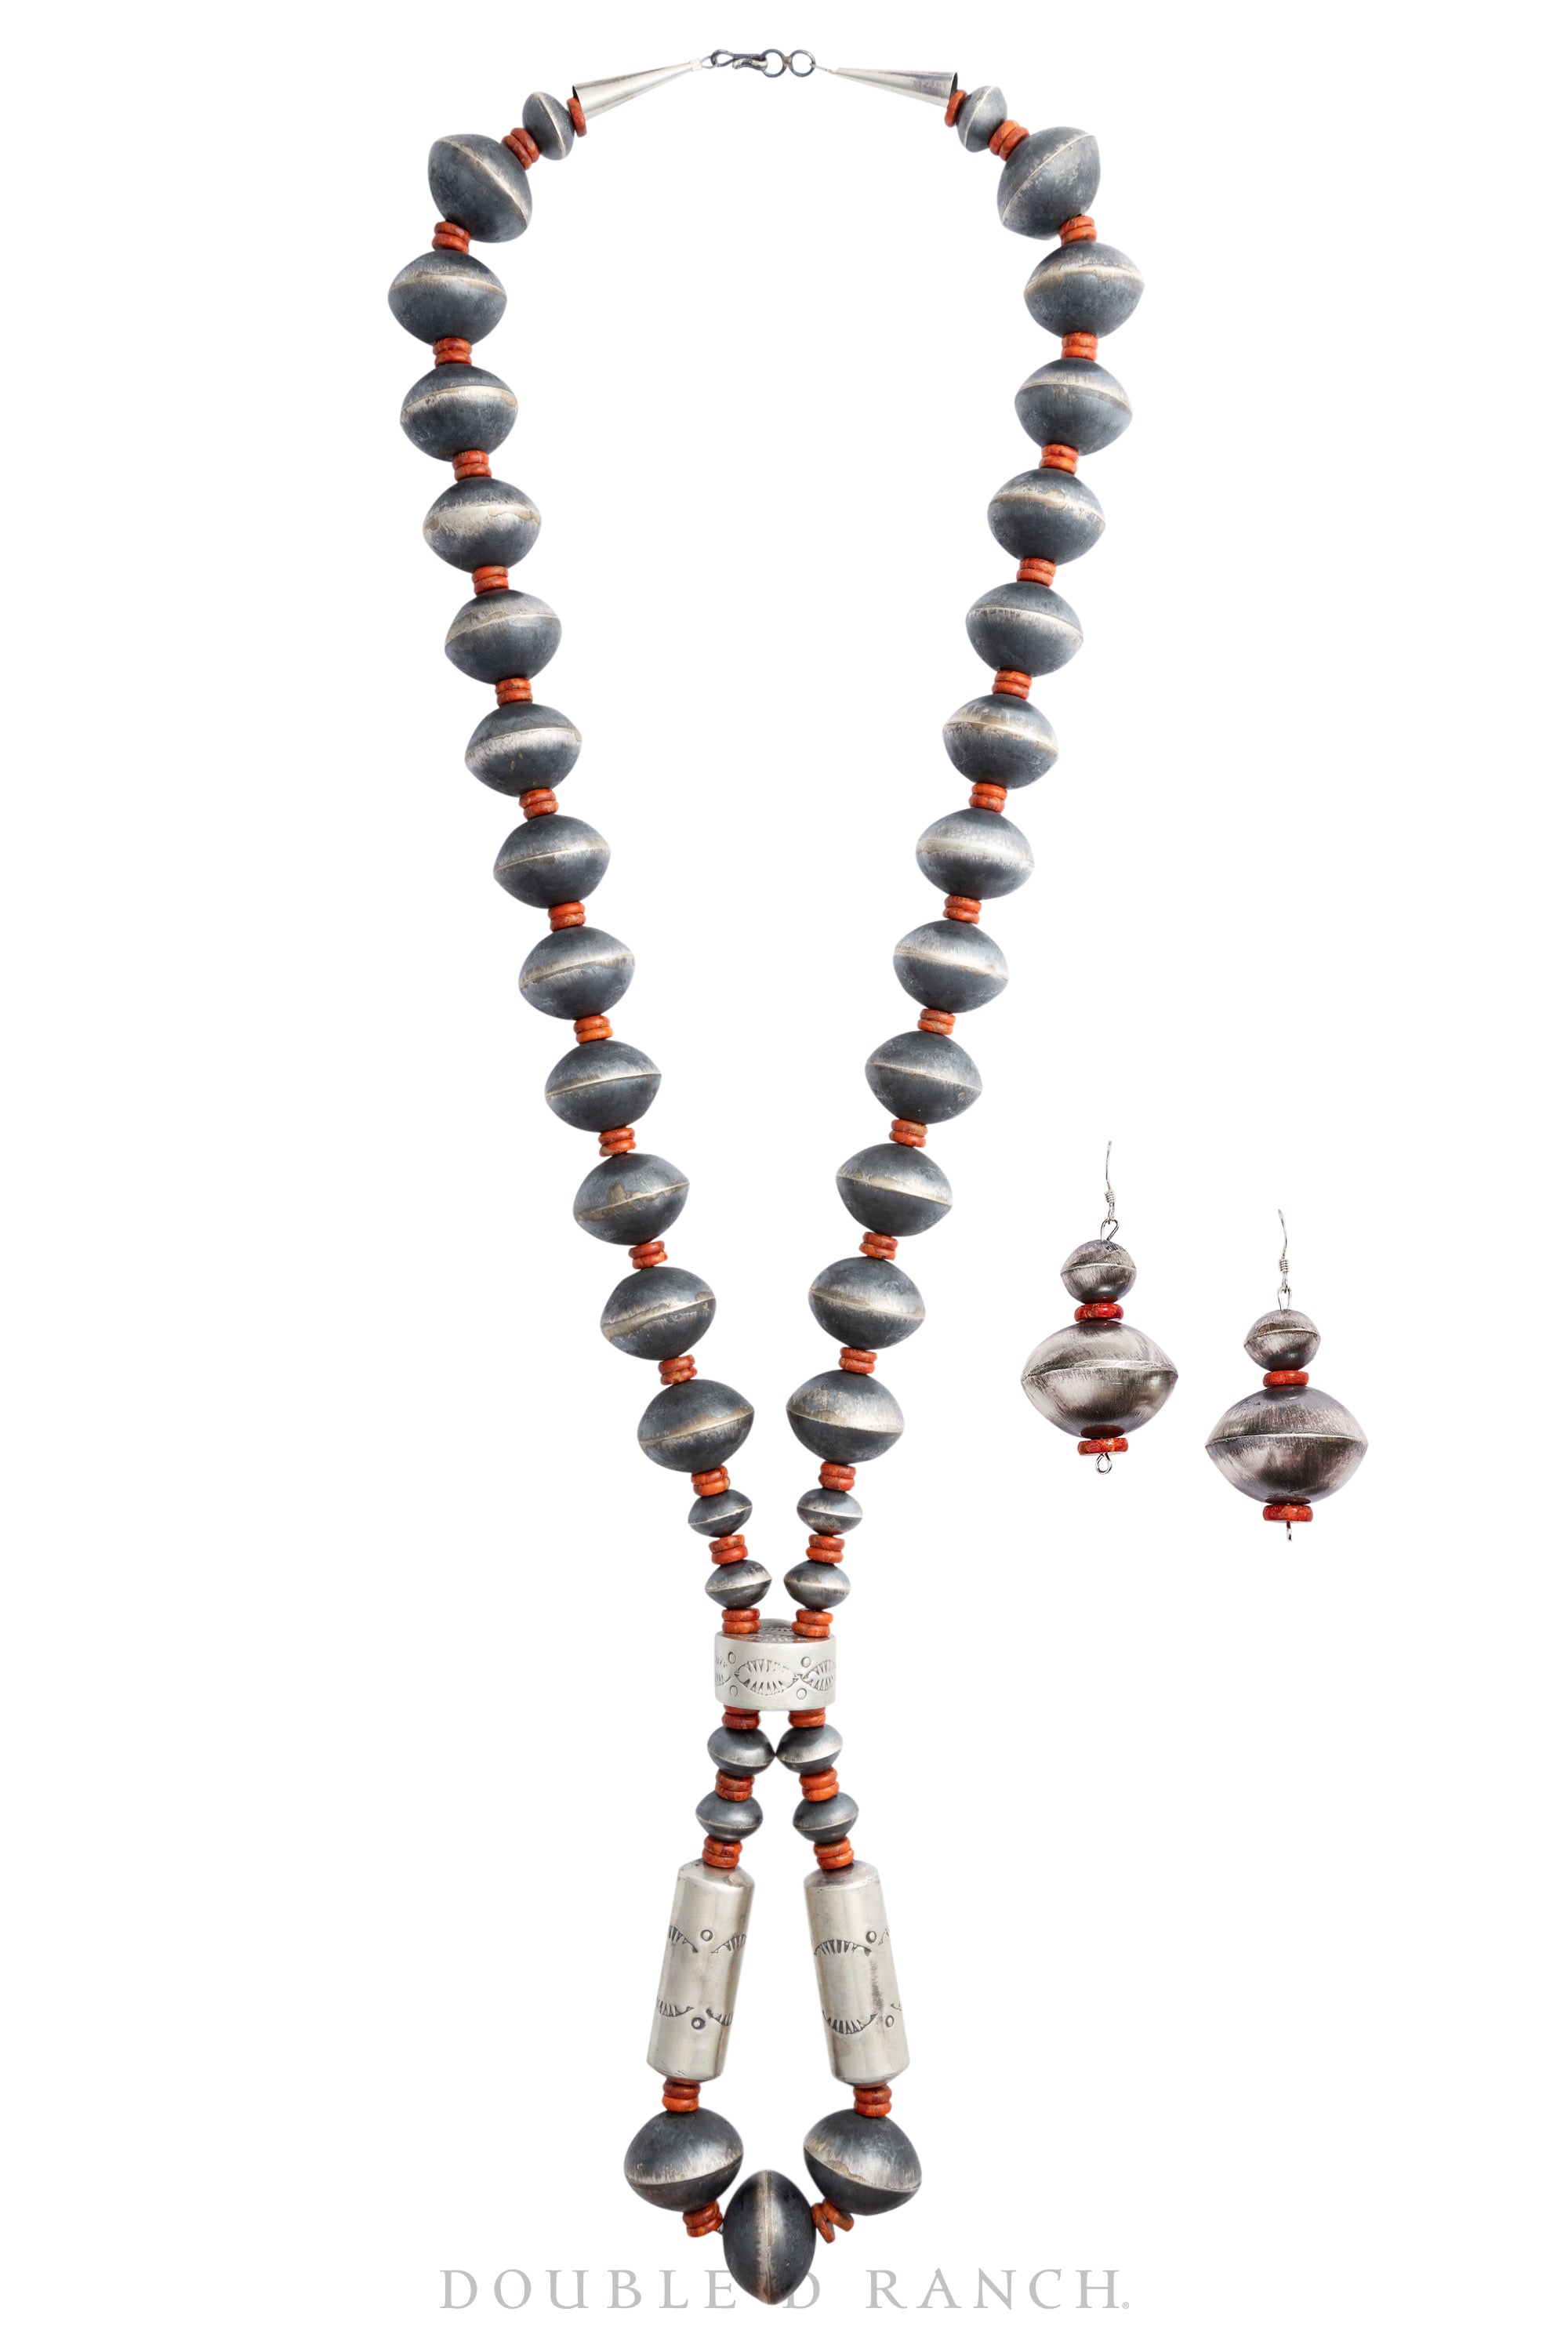 Necklace, Desert Pearls, Orange Spiny Oyster & Sterling Silver, Tube Beads, Includes Matching Earrings, Contemporary, 1714